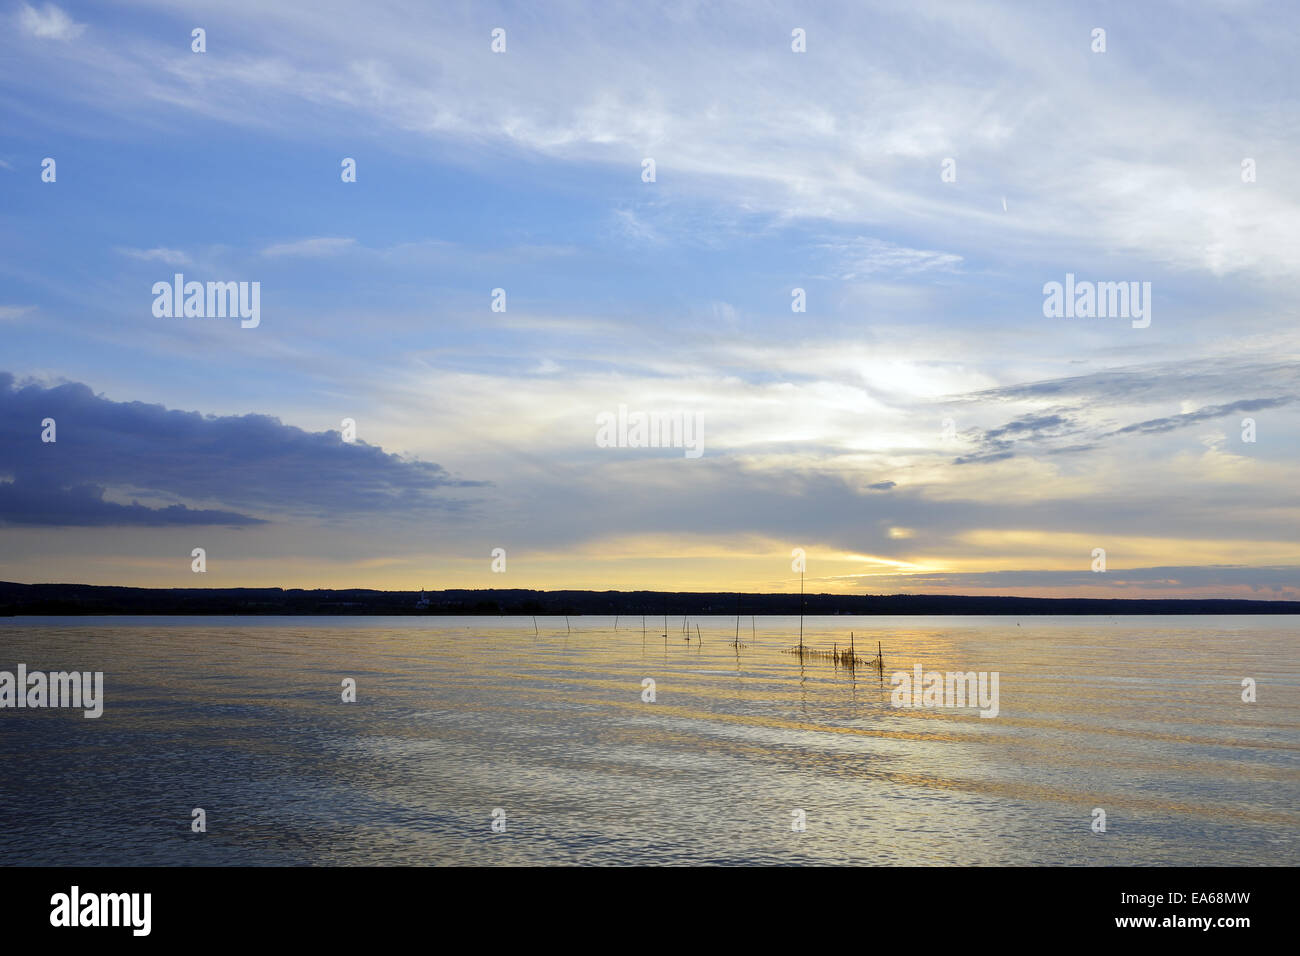 Ammersee Stock Photo